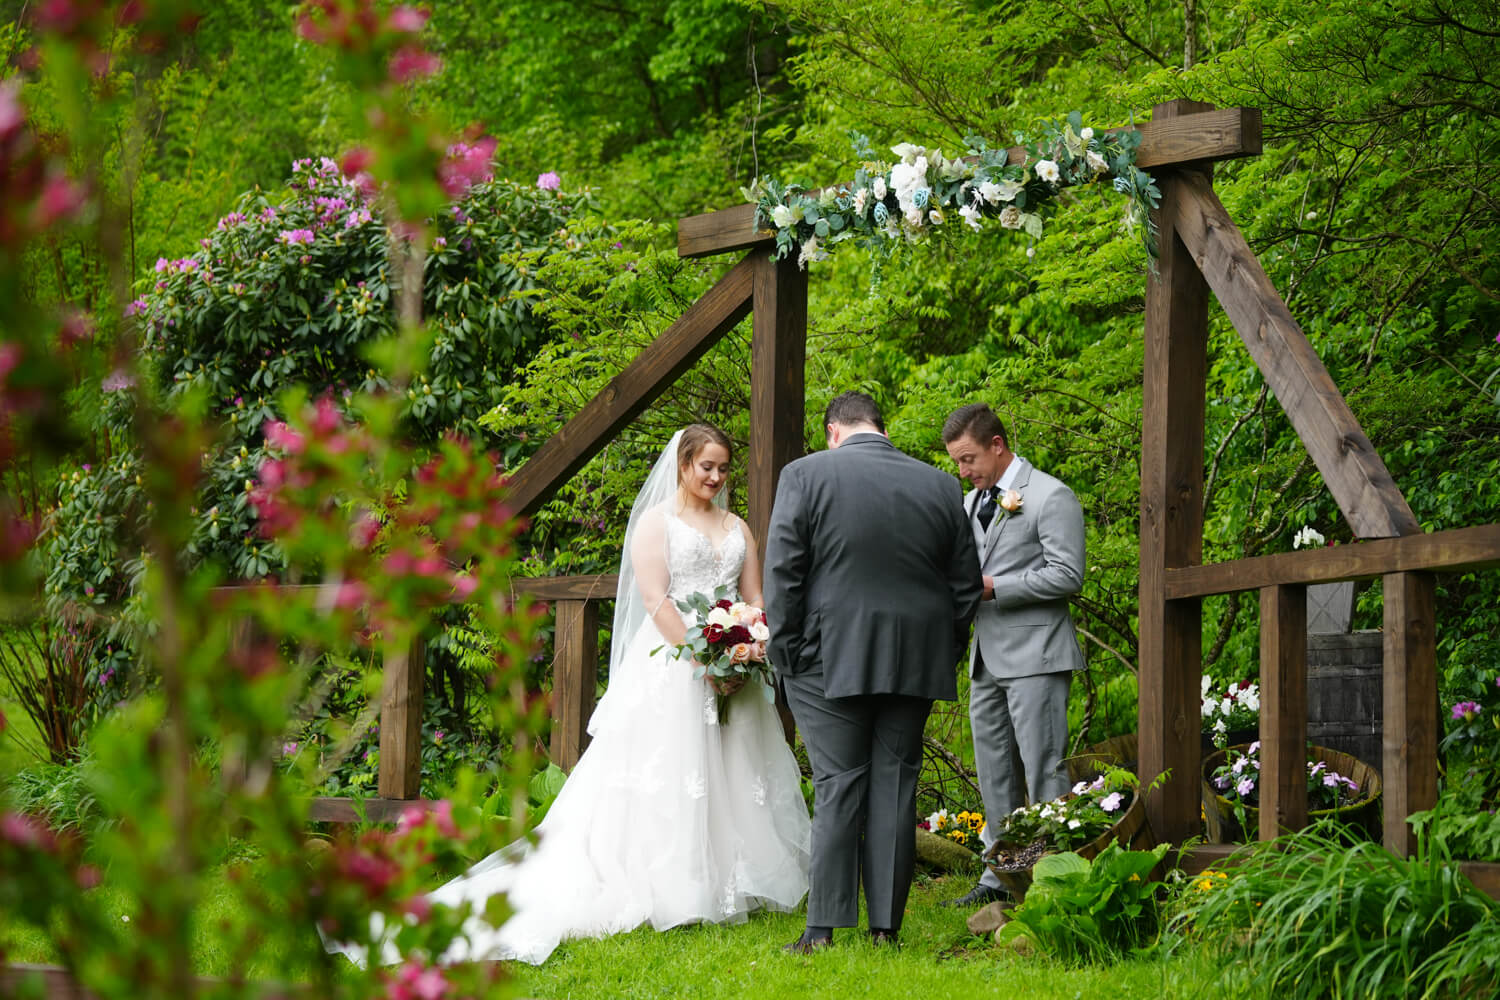 wedding at a wooden arbor in the spring